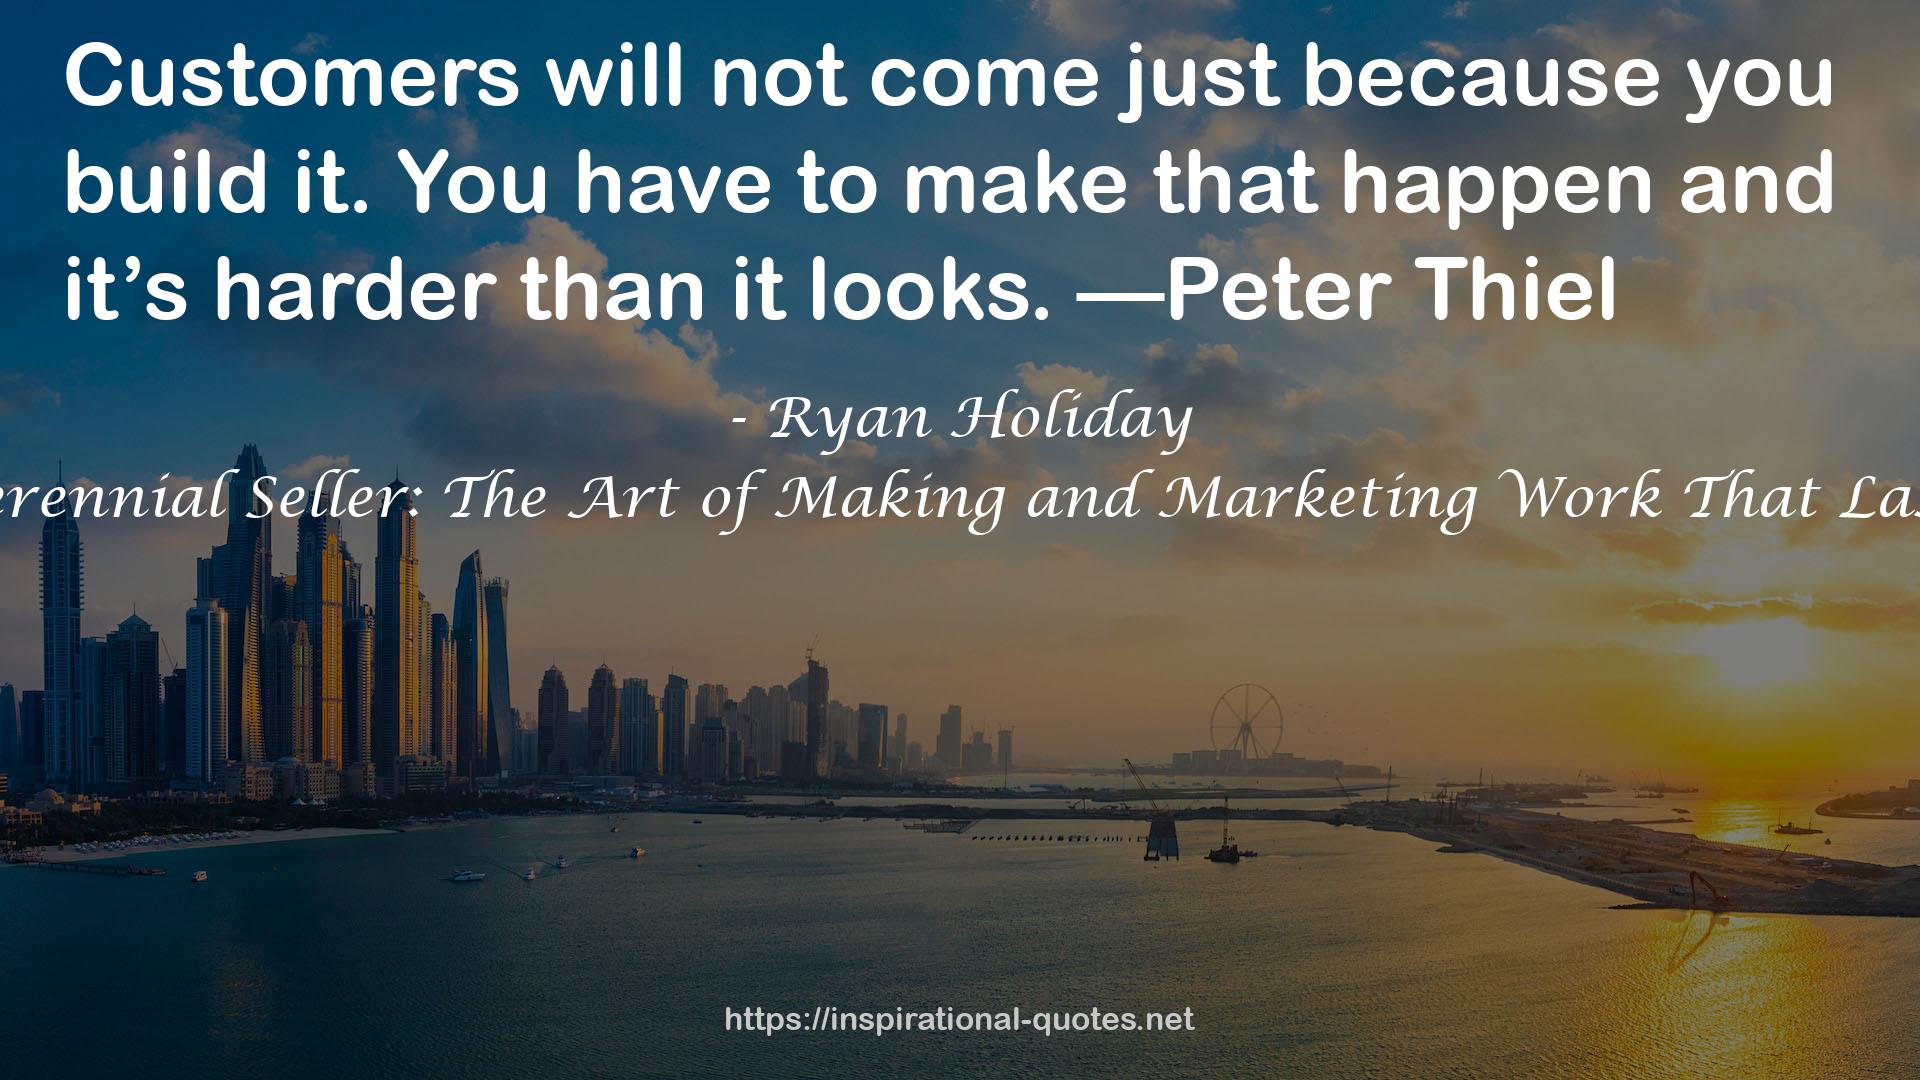 Perennial Seller: The Art of Making and Marketing Work That Lasts QUOTES